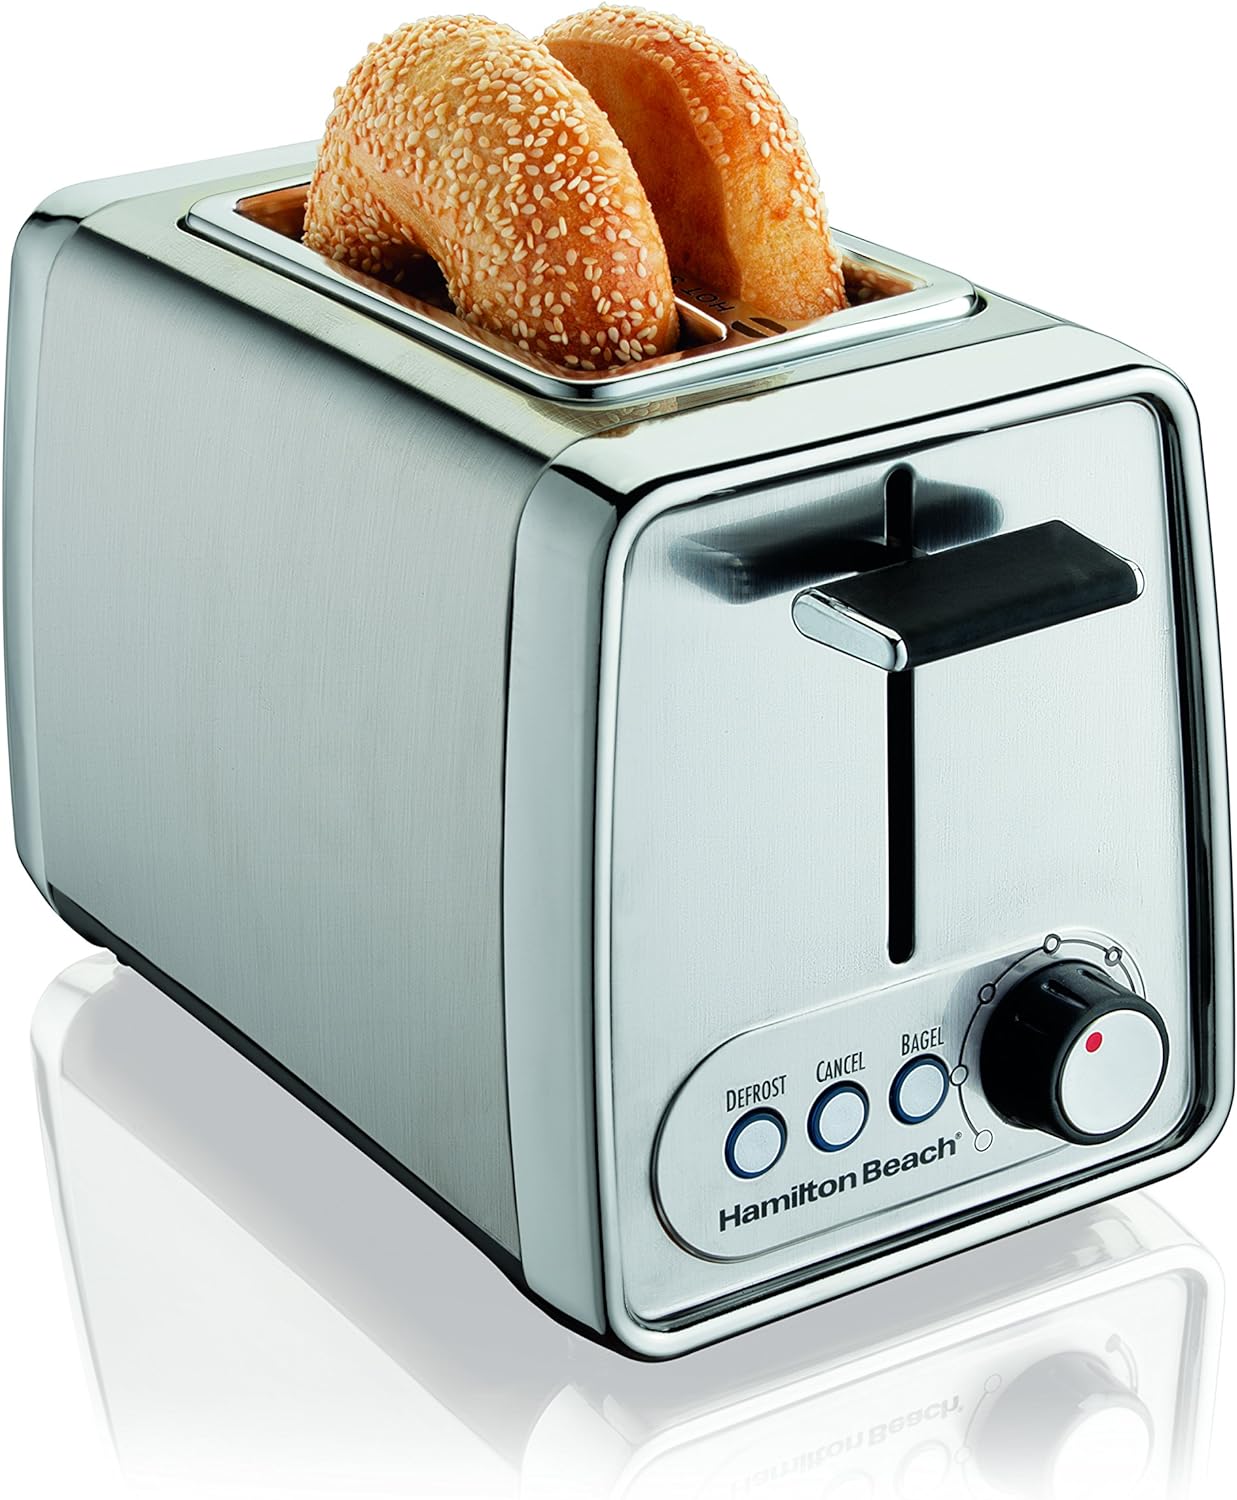 Hamilton Beach Modern Chrome 2 Slice Extra Wide Slot Toaster with Bagel and Defrost Settings, Shade Selector, Toast Boost, Slide-Out Crumb Tray, Auto-Shutoff and Cancel Button (22791)